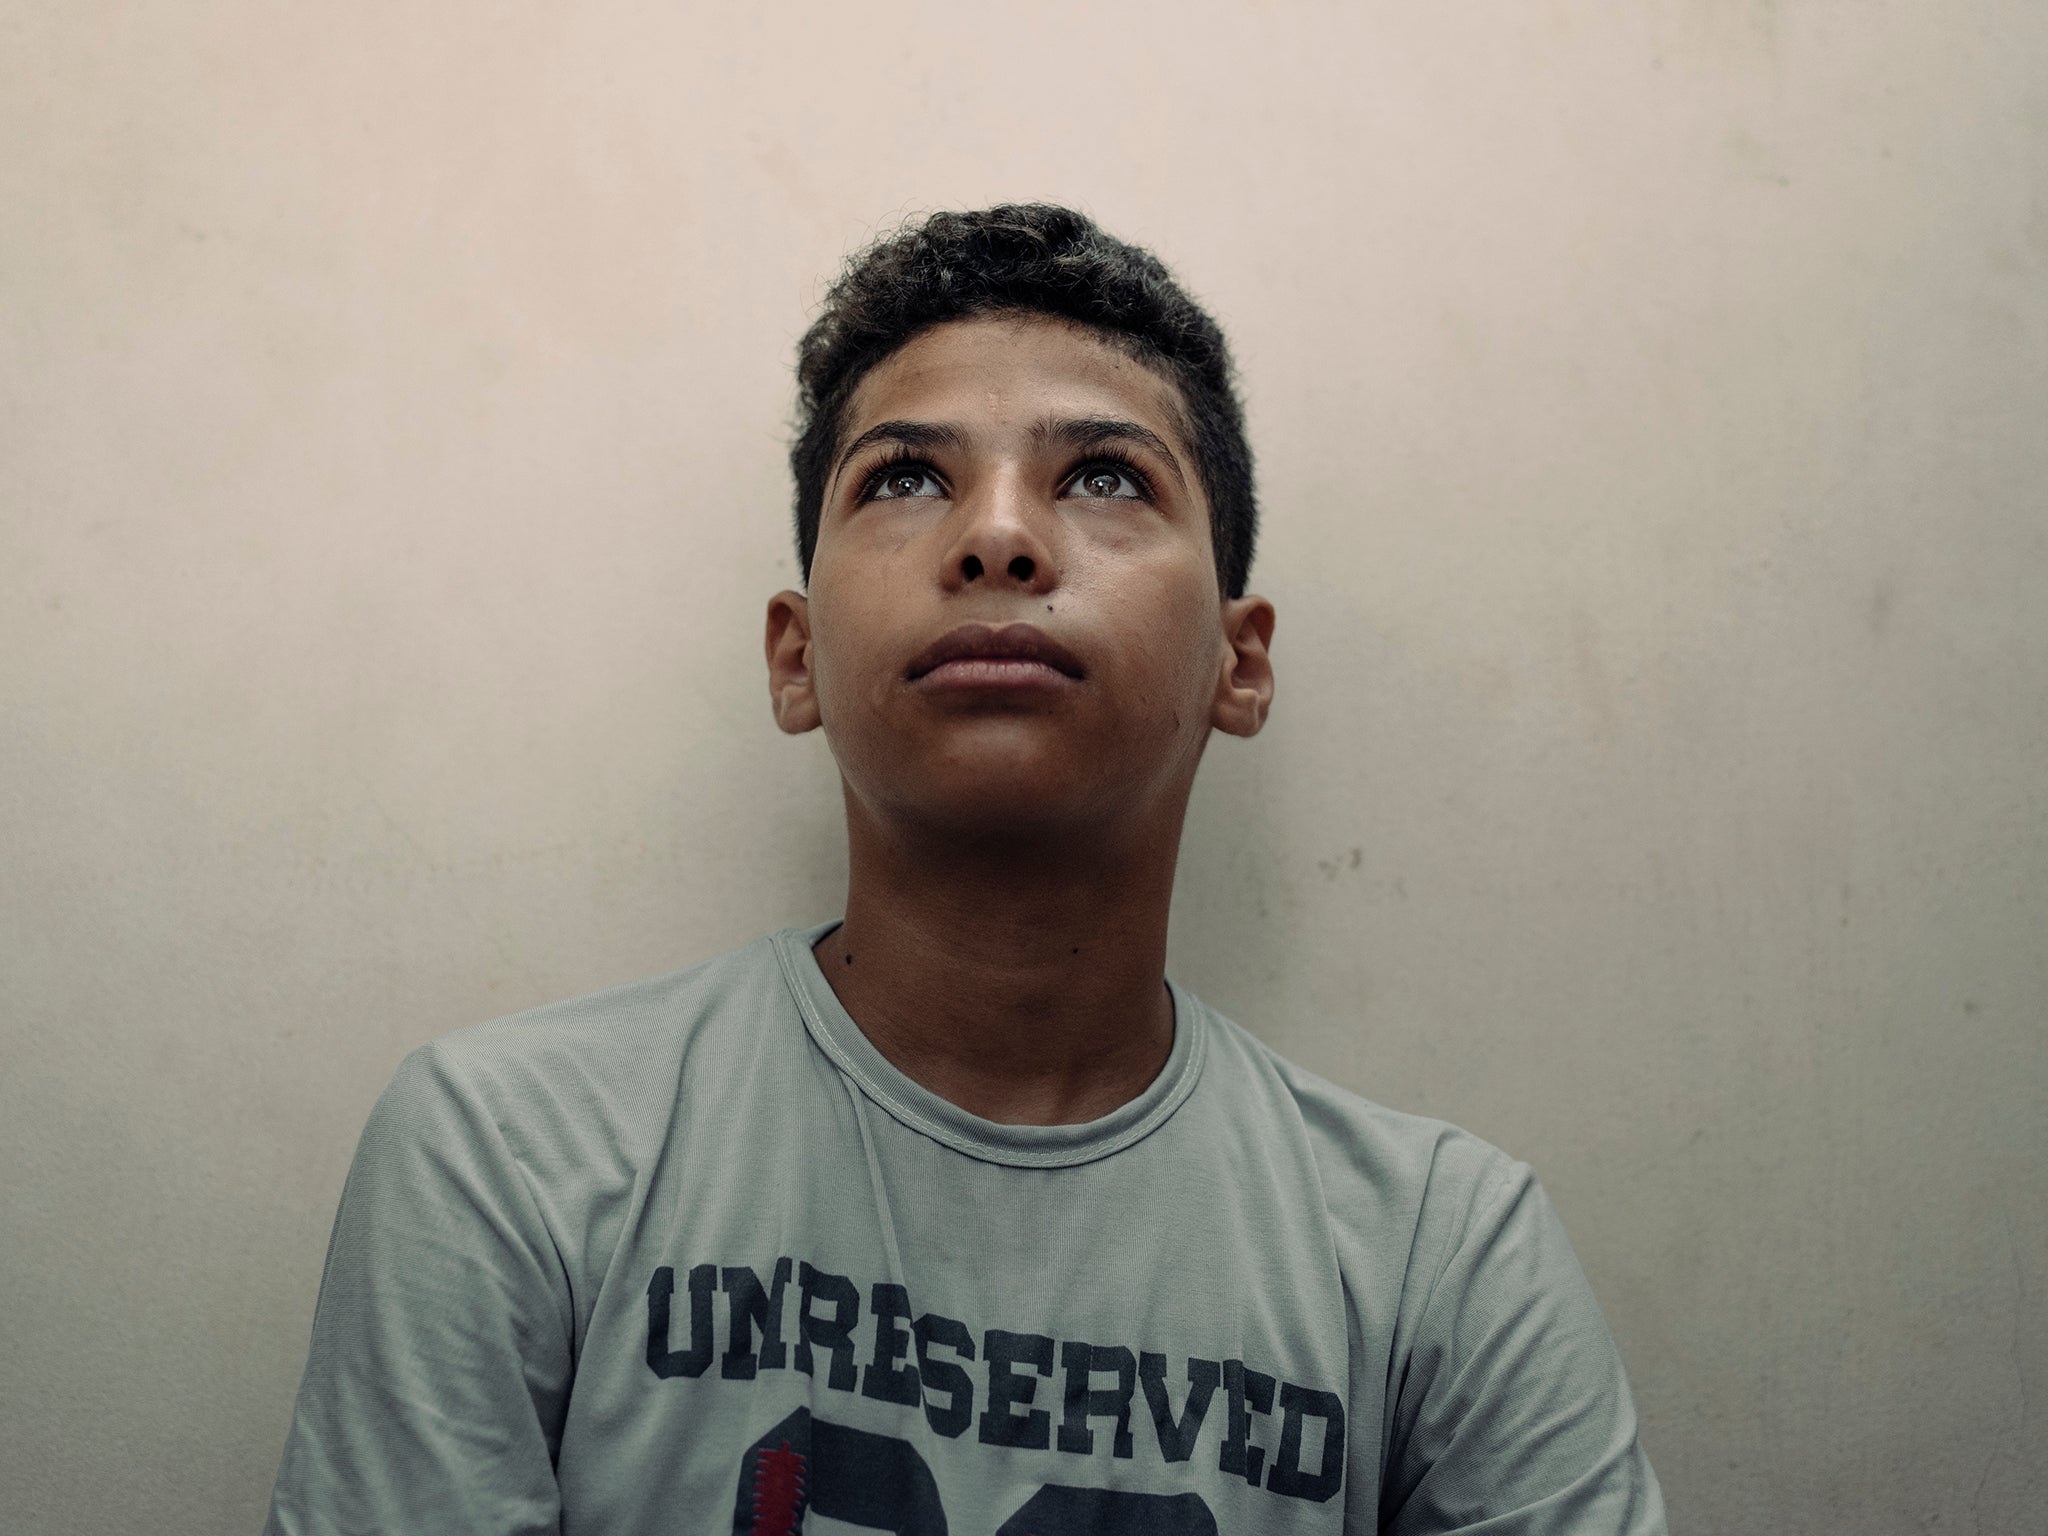 Mohammed, 14, was supported by the Wajd programme after the loss of his father in 201. He was given psychosocial support, food aid, educational fees and laptops for school work